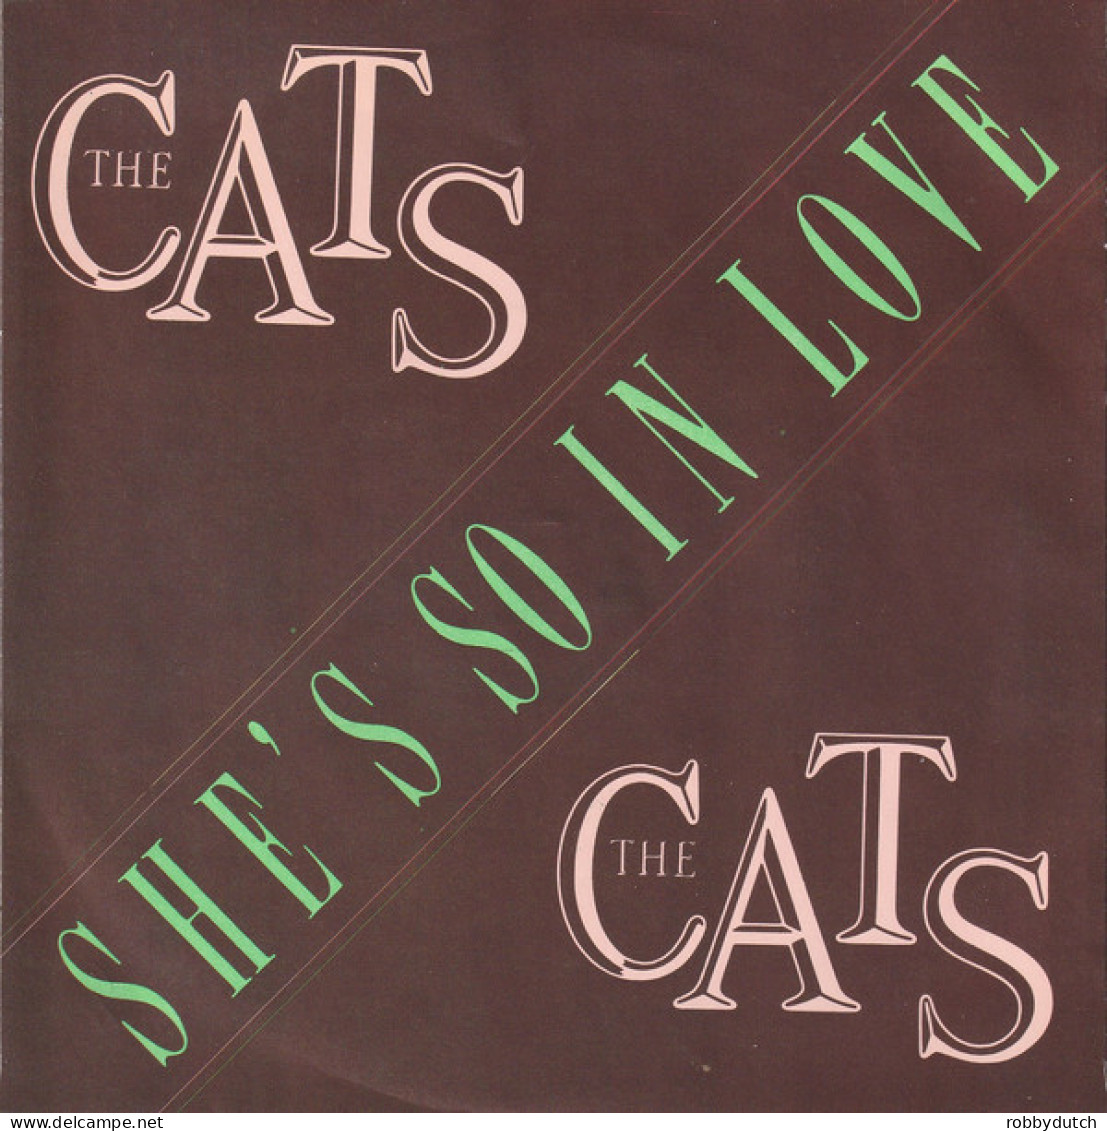 * 7" *  The CATS - SHE'S SO IN LOVE (Holland 1985 EX-) - Disco, Pop